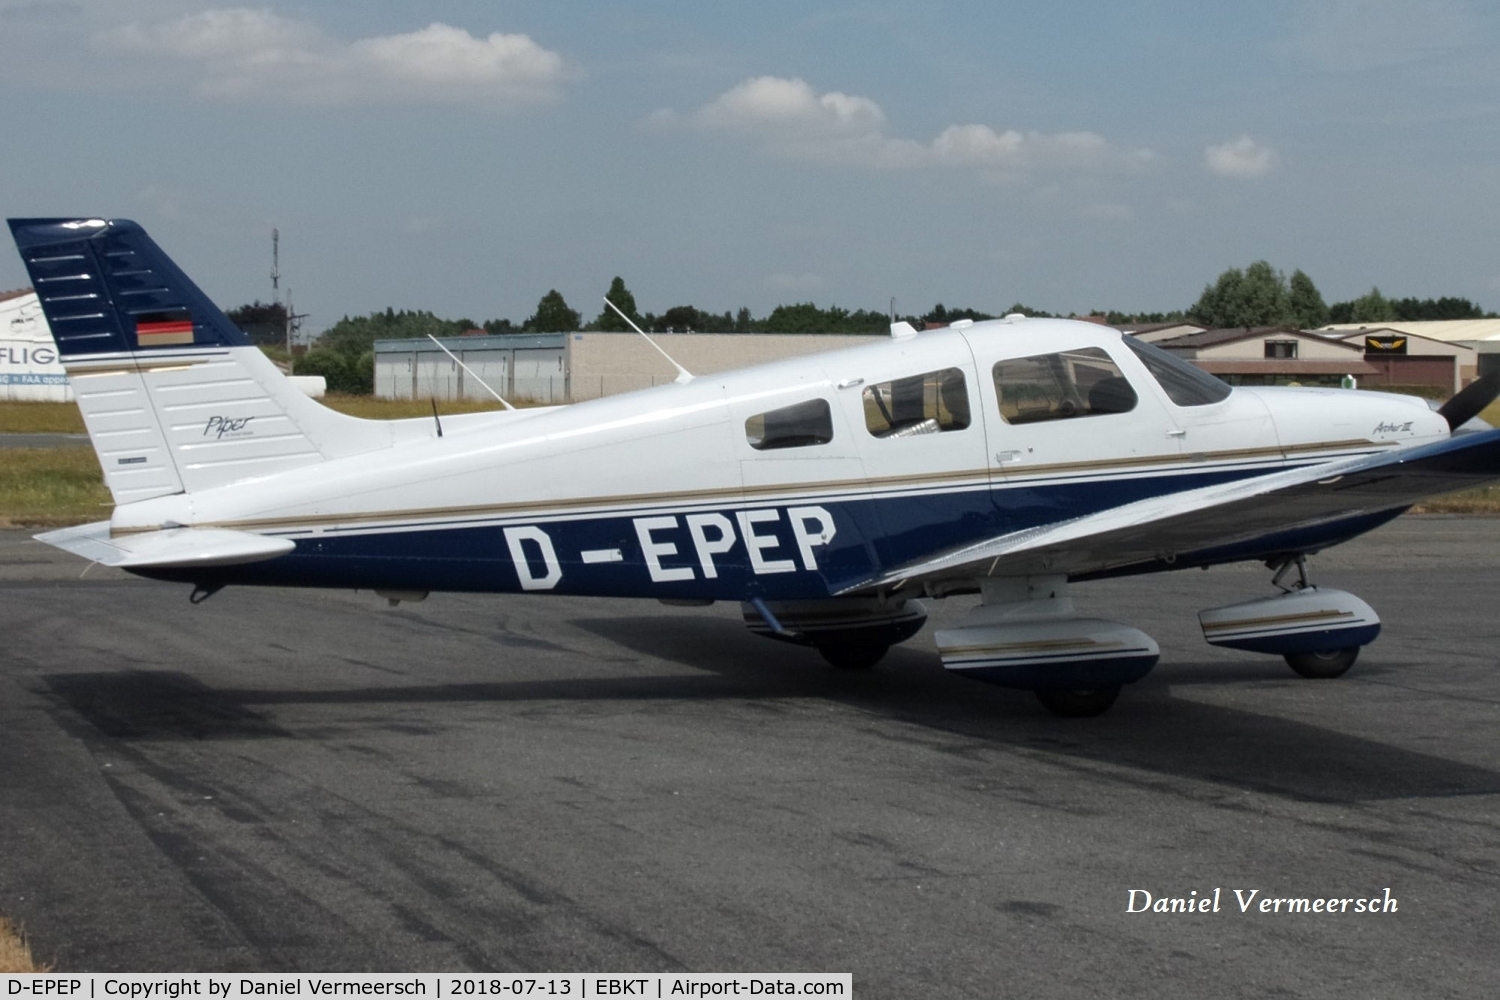 D-EPEP, 2016 Piper PA-28-181 C/N 2890217, 1995 Archer III at Wevelgem.